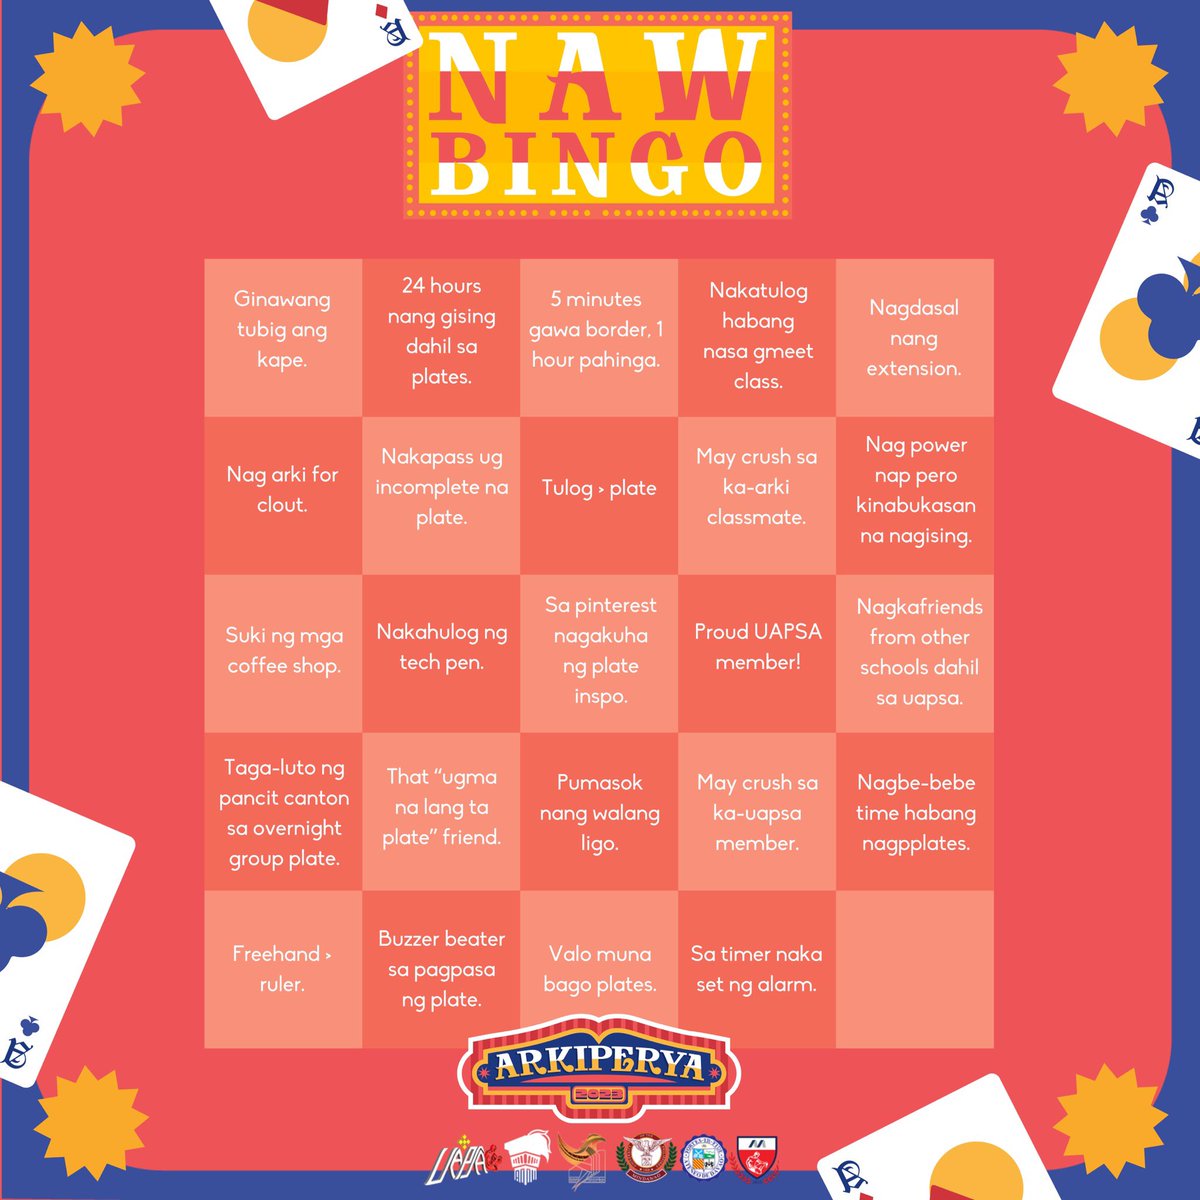 Bago mag ARKIperya, mag 𝗯𝗶𝗻𝗴𝗼 ka muna, ka-UAPSA! ✍️

Hop on the fun for our National Architecture Week 2022 celebration and share with us your relatable Arki moments by using the ARKIperya Bingo Template ✨

Don’t forget to quote and tag us! 😉

#ArkiPerya 
#NAW2022